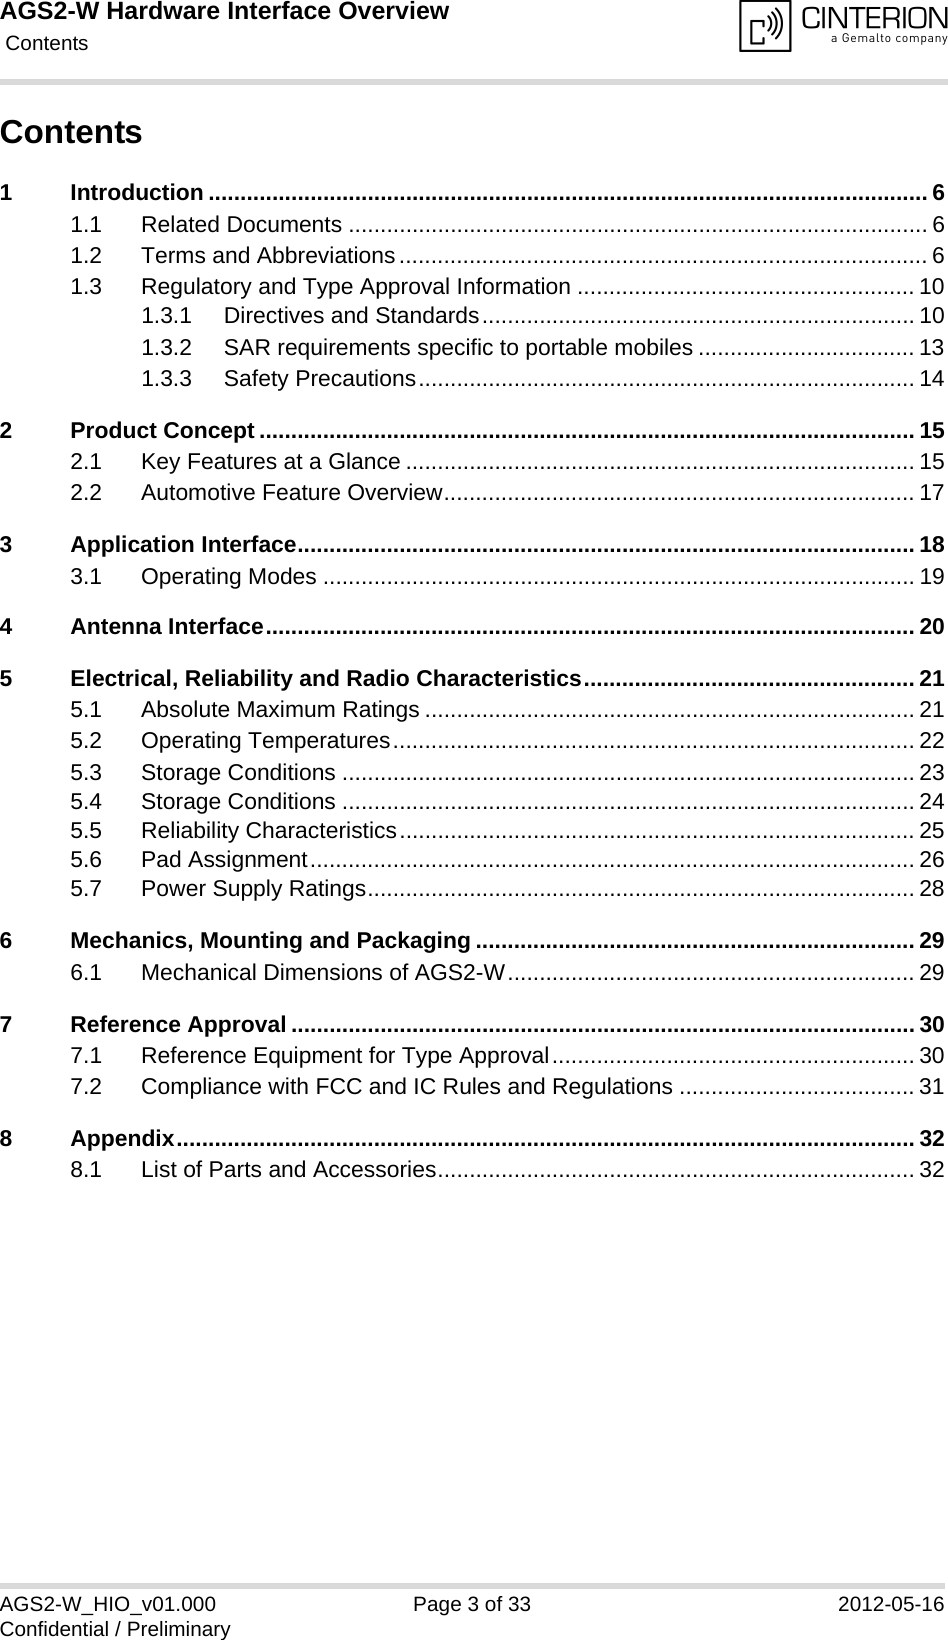 AGS2-W Hardware Interface Overview Contents33AGS2-W_HIO_v01.000 Page 3 of 33 2012-05-16Confidential / PreliminaryContents1 Introduction ................................................................................................................. 61.1 Related Documents ........................................................................................... 61.2 Terms and Abbreviations................................................................................... 61.3 Regulatory and Type Approval Information ..................................................... 101.3.1 Directives and Standards.................................................................... 101.3.2 SAR requirements specific to portable mobiles .................................. 131.3.3 Safety Precautions.............................................................................. 142 Product Concept ....................................................................................................... 152.1 Key Features at a Glance ................................................................................ 152.2 Automotive Feature Overview.......................................................................... 173 Application Interface................................................................................................. 183.1 Operating Modes ............................................................................................. 194 Antenna Interface...................................................................................................... 205 Electrical, Reliability and Radio Characteristics.................................................... 215.1 Absolute Maximum Ratings ............................................................................. 215.2 Operating Temperatures.................................................................................. 225.3 Storage Conditions .......................................................................................... 235.4 Storage Conditions .......................................................................................... 245.5 Reliability Characteristics................................................................................. 255.6 Pad Assignment............................................................................................... 265.7 Power Supply Ratings...................................................................................... 286 Mechanics, Mounting and Packaging ..................................................................... 296.1 Mechanical Dimensions of AGS2-W................................................................ 297 Reference Approval .................................................................................................. 307.1 Reference Equipment for Type Approval......................................................... 307.2 Compliance with FCC and IC Rules and Regulations ..................................... 318 Appendix.................................................................................................................... 328.1 List of Parts and Accessories........................................................................... 32